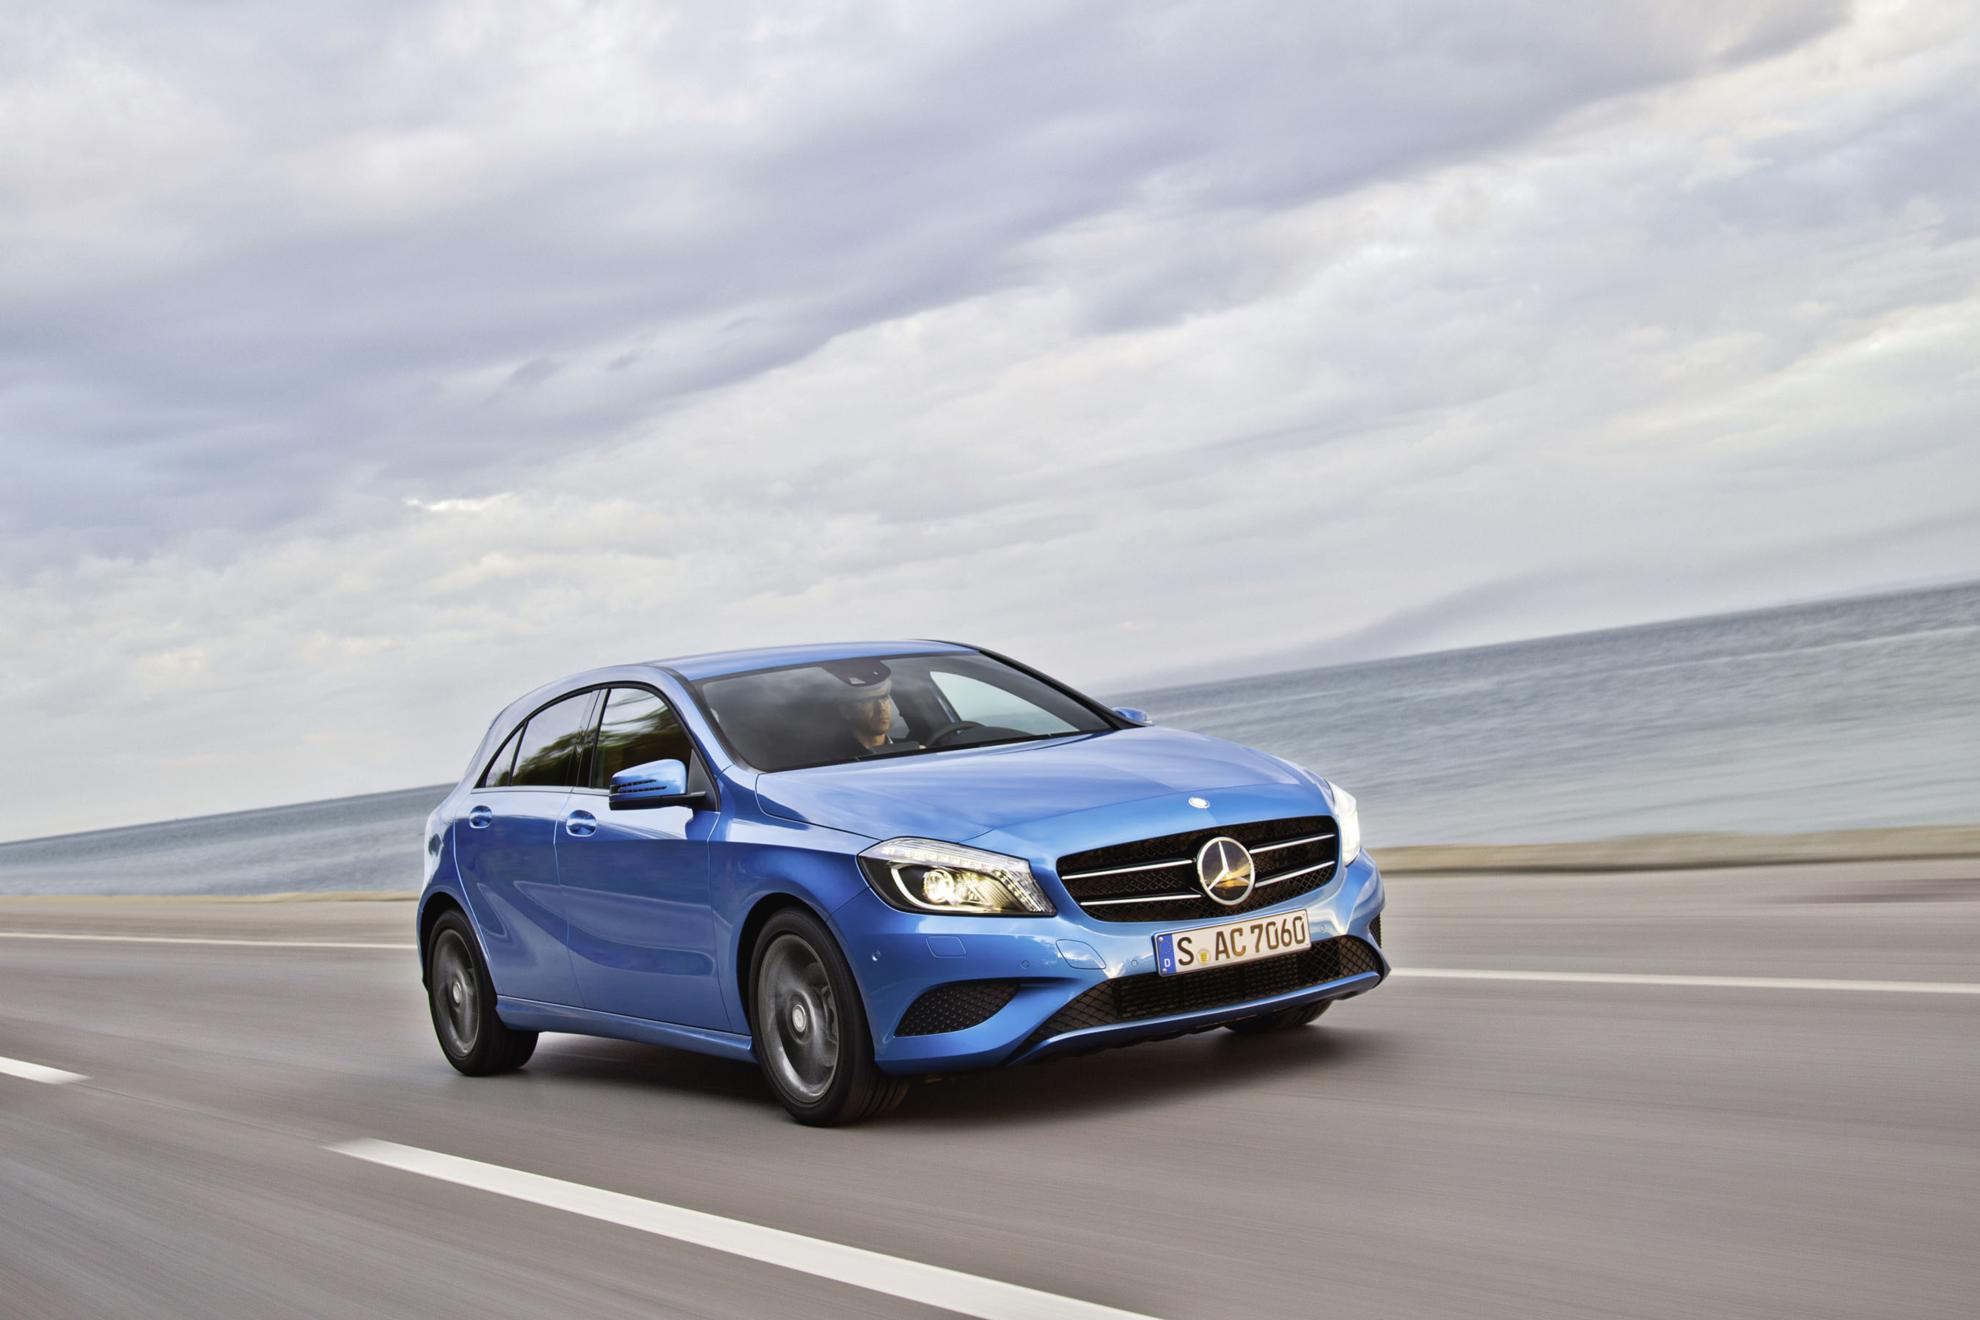 Mercedes-Benz A-Class Diesel Engines in South Africa